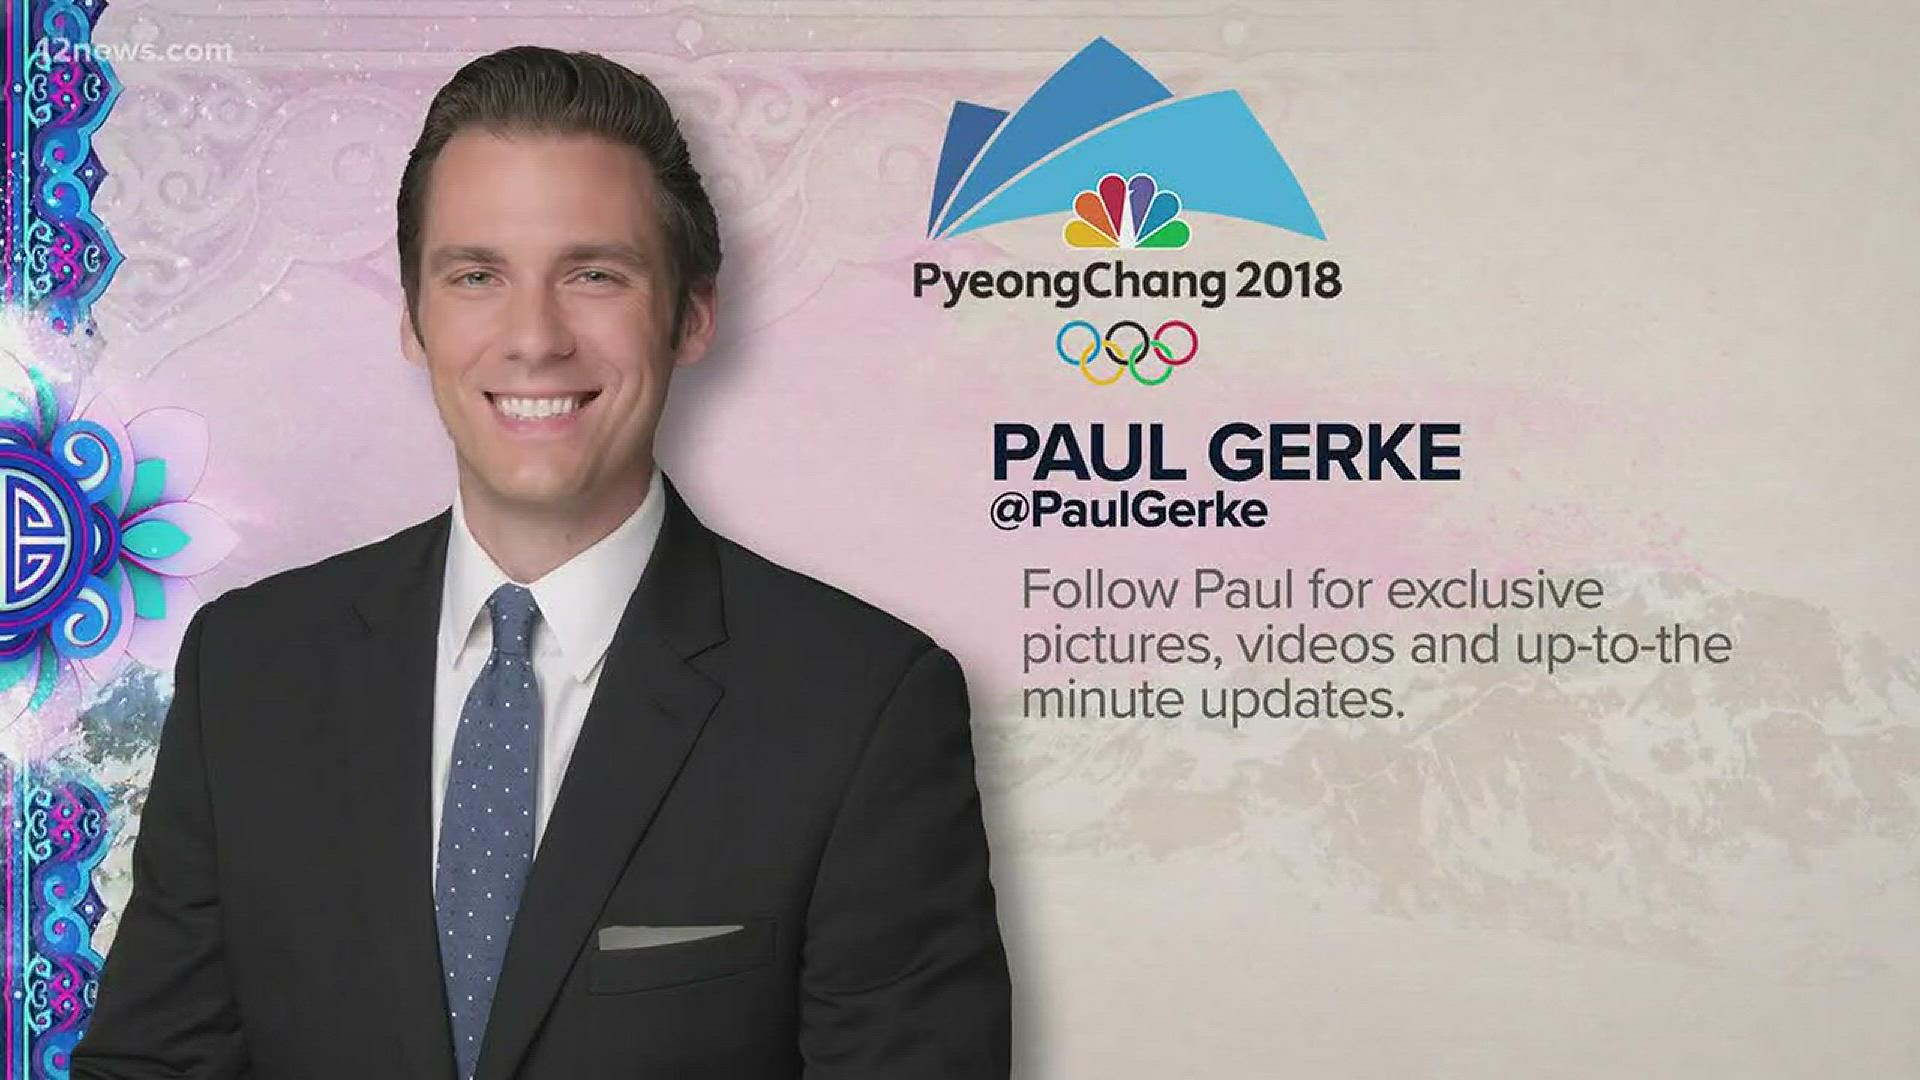 Watch Channel 12, the official station for the 2018 winter Olympics in PyeongChang. 12 News anchor Paul Gerke will be in South Korea to bring us live reports and behind-the-scenes coverage.